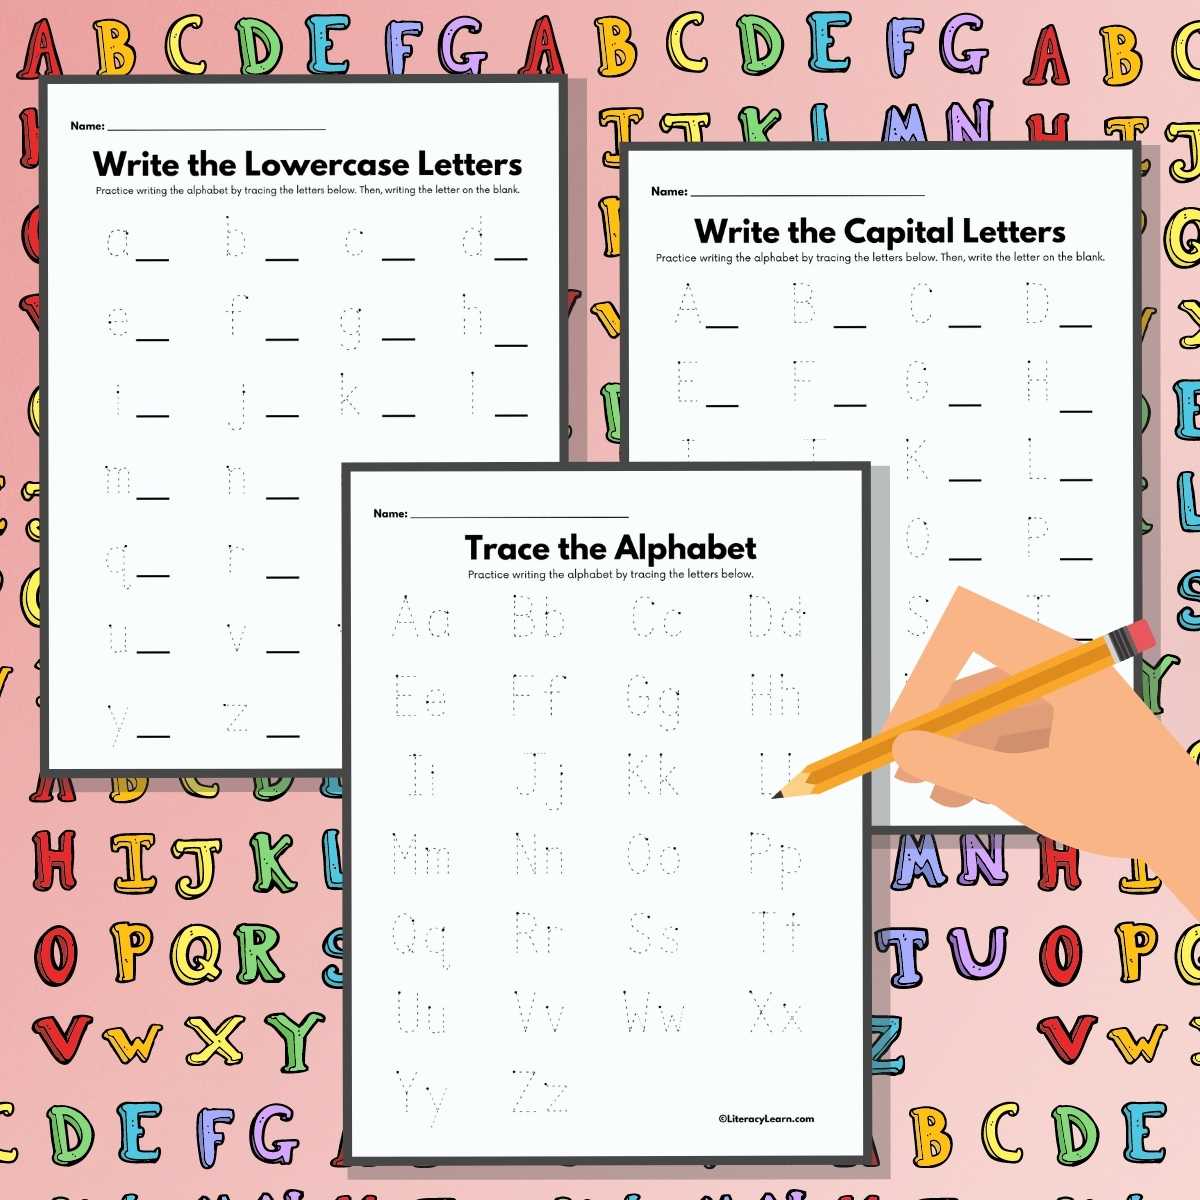 Graphic with three alphabet tracing worksheets on a colorful alphabet background.